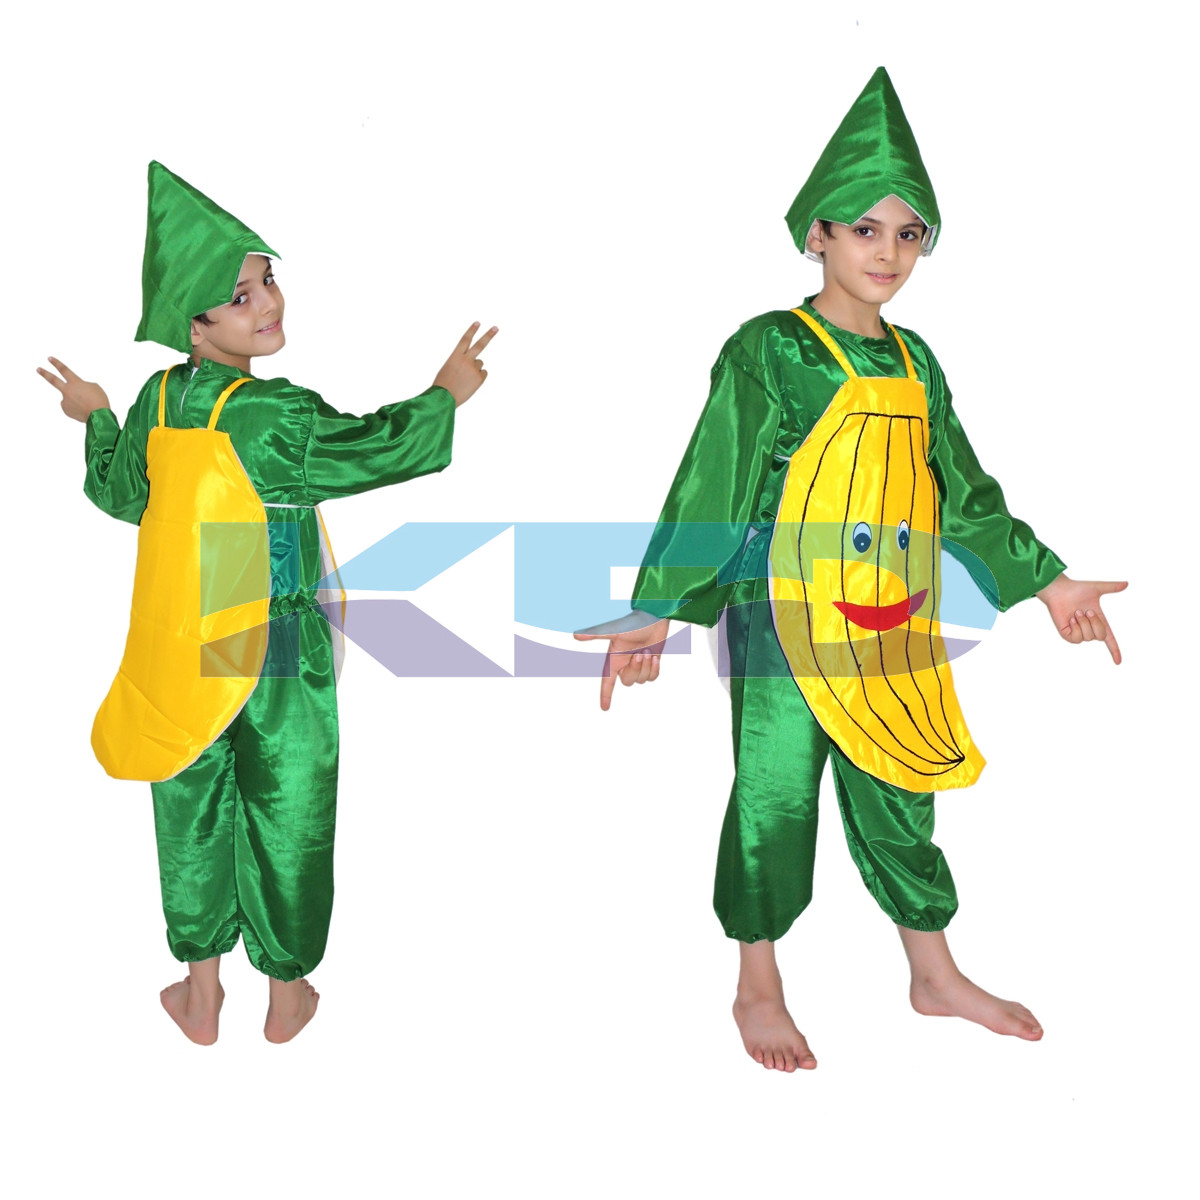 Banana fancy dress for kids,Fruits Costume for School Annual function/Theme Party/Competition/Stage Shows Dress